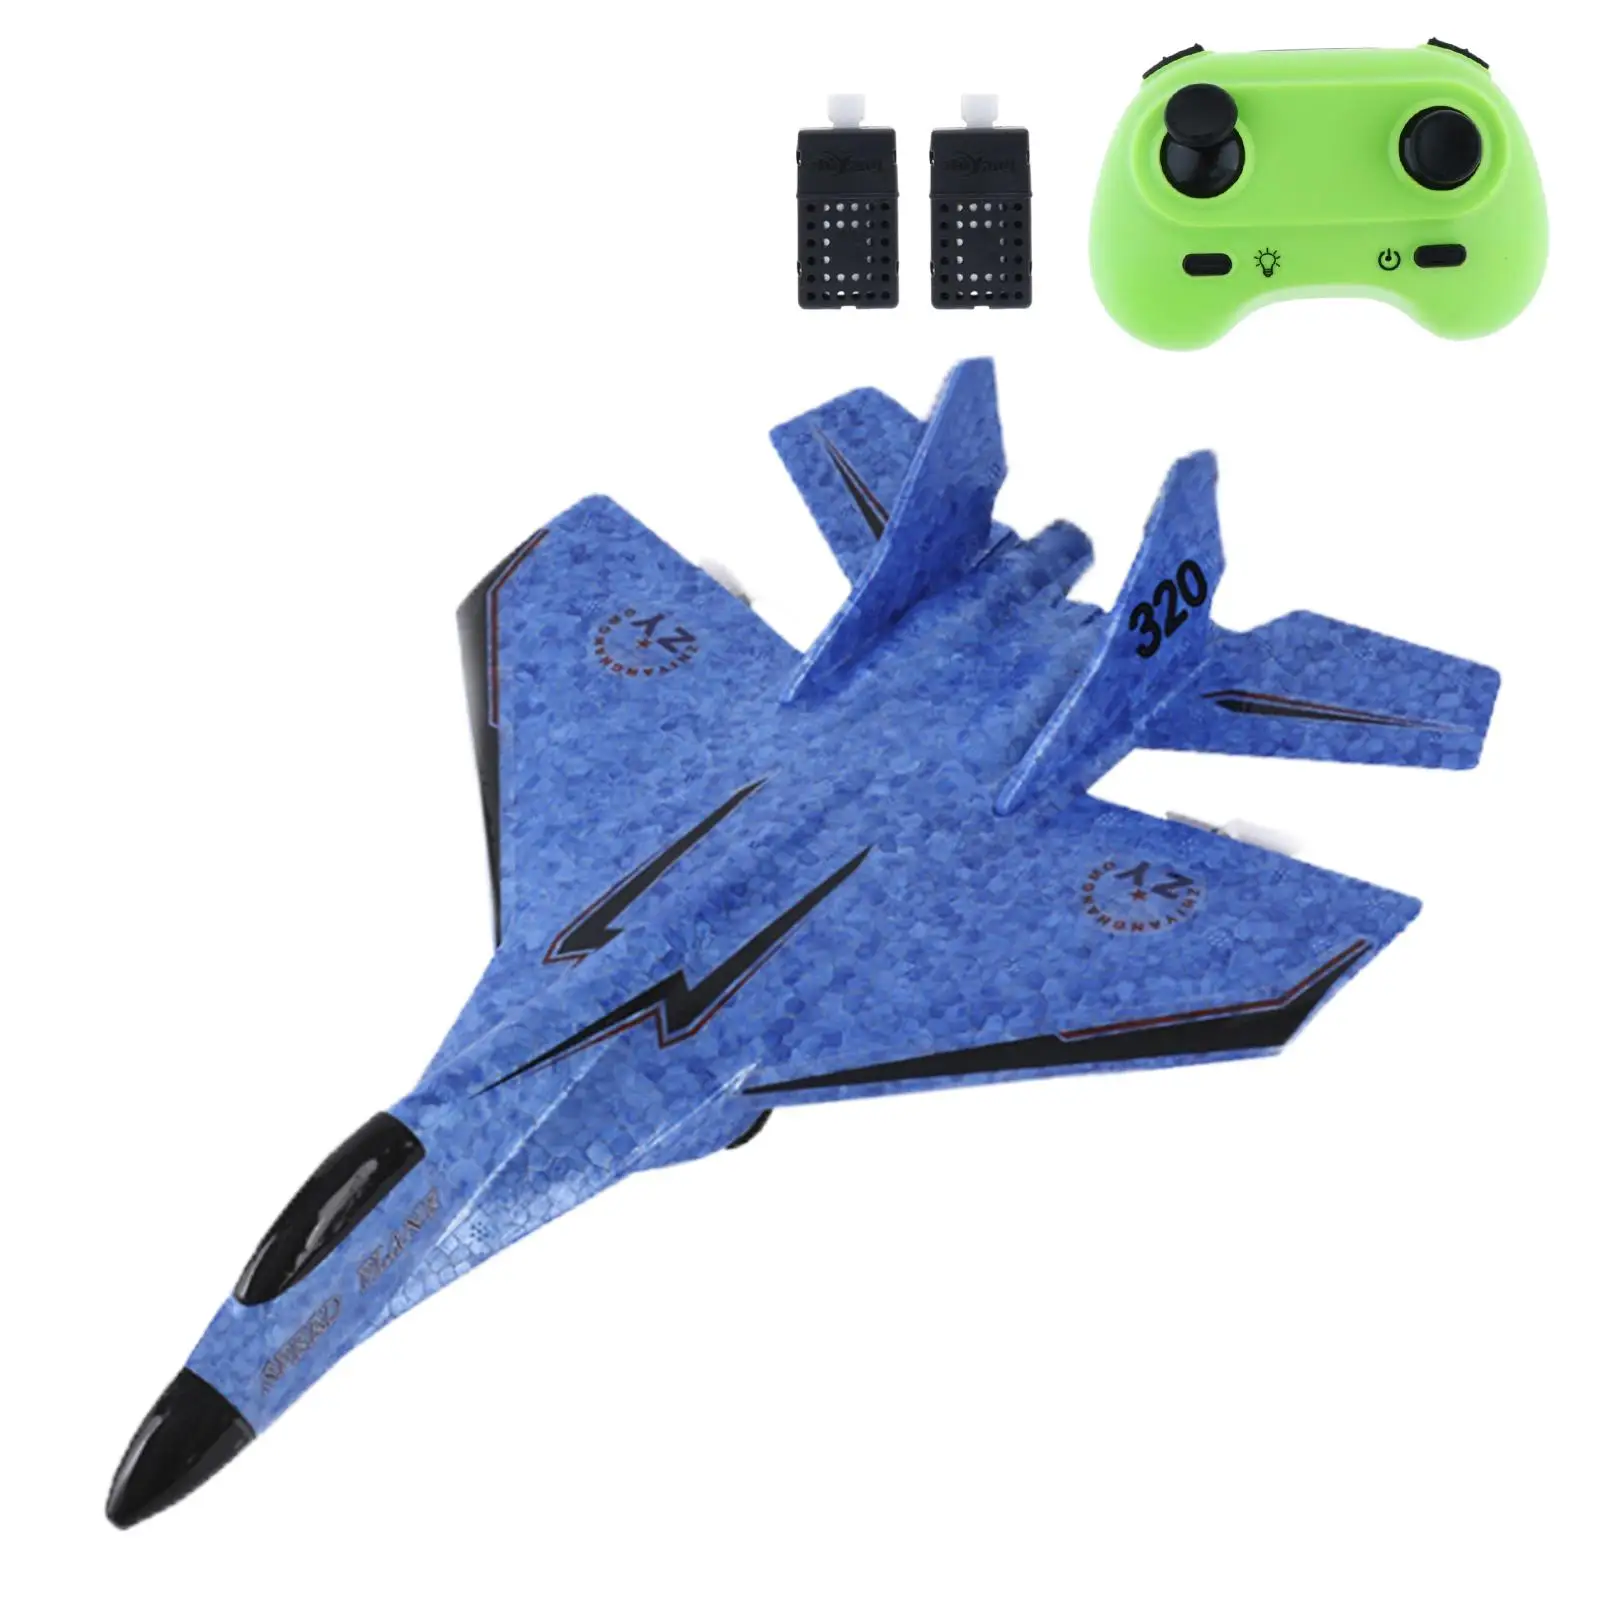 Foam Plane Jet Fighter to Fly Remote Control Aircraft Fixed Wing Aircraft RC Glider Plane Birthday Gift Outdoor Toy